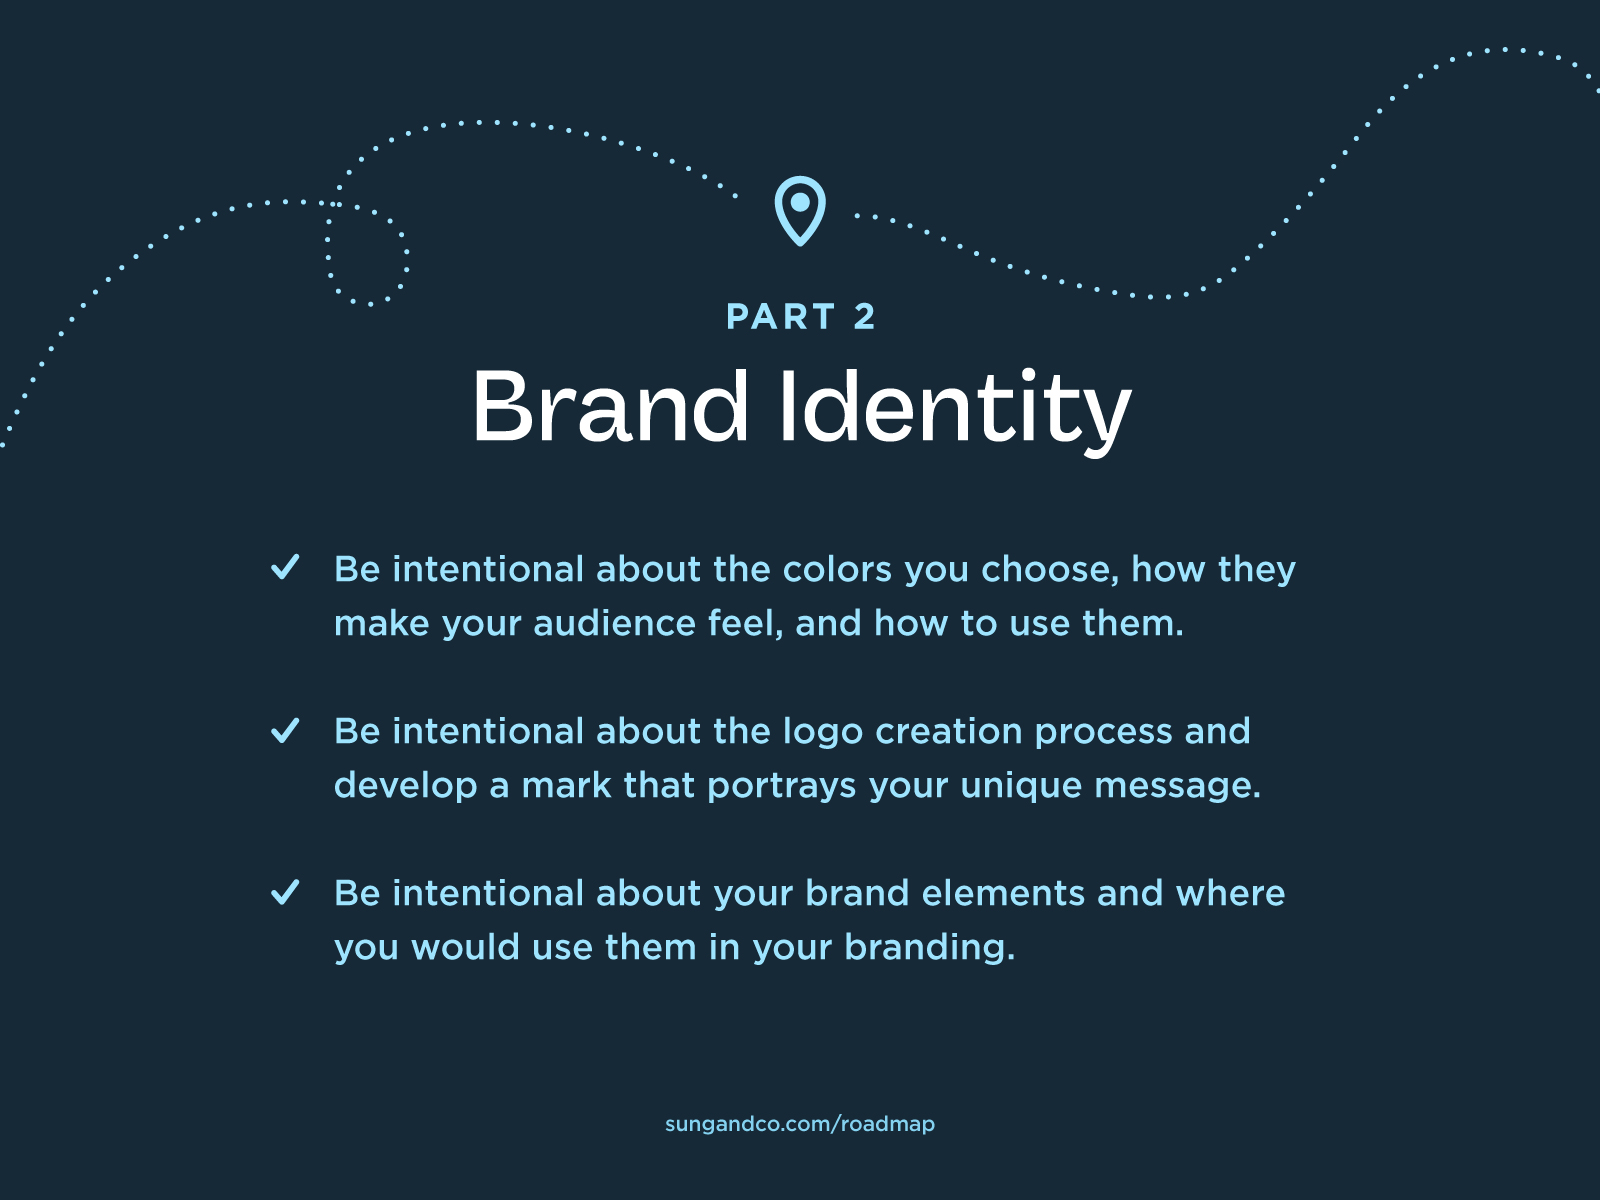 How to build a brand part 2: brand identity